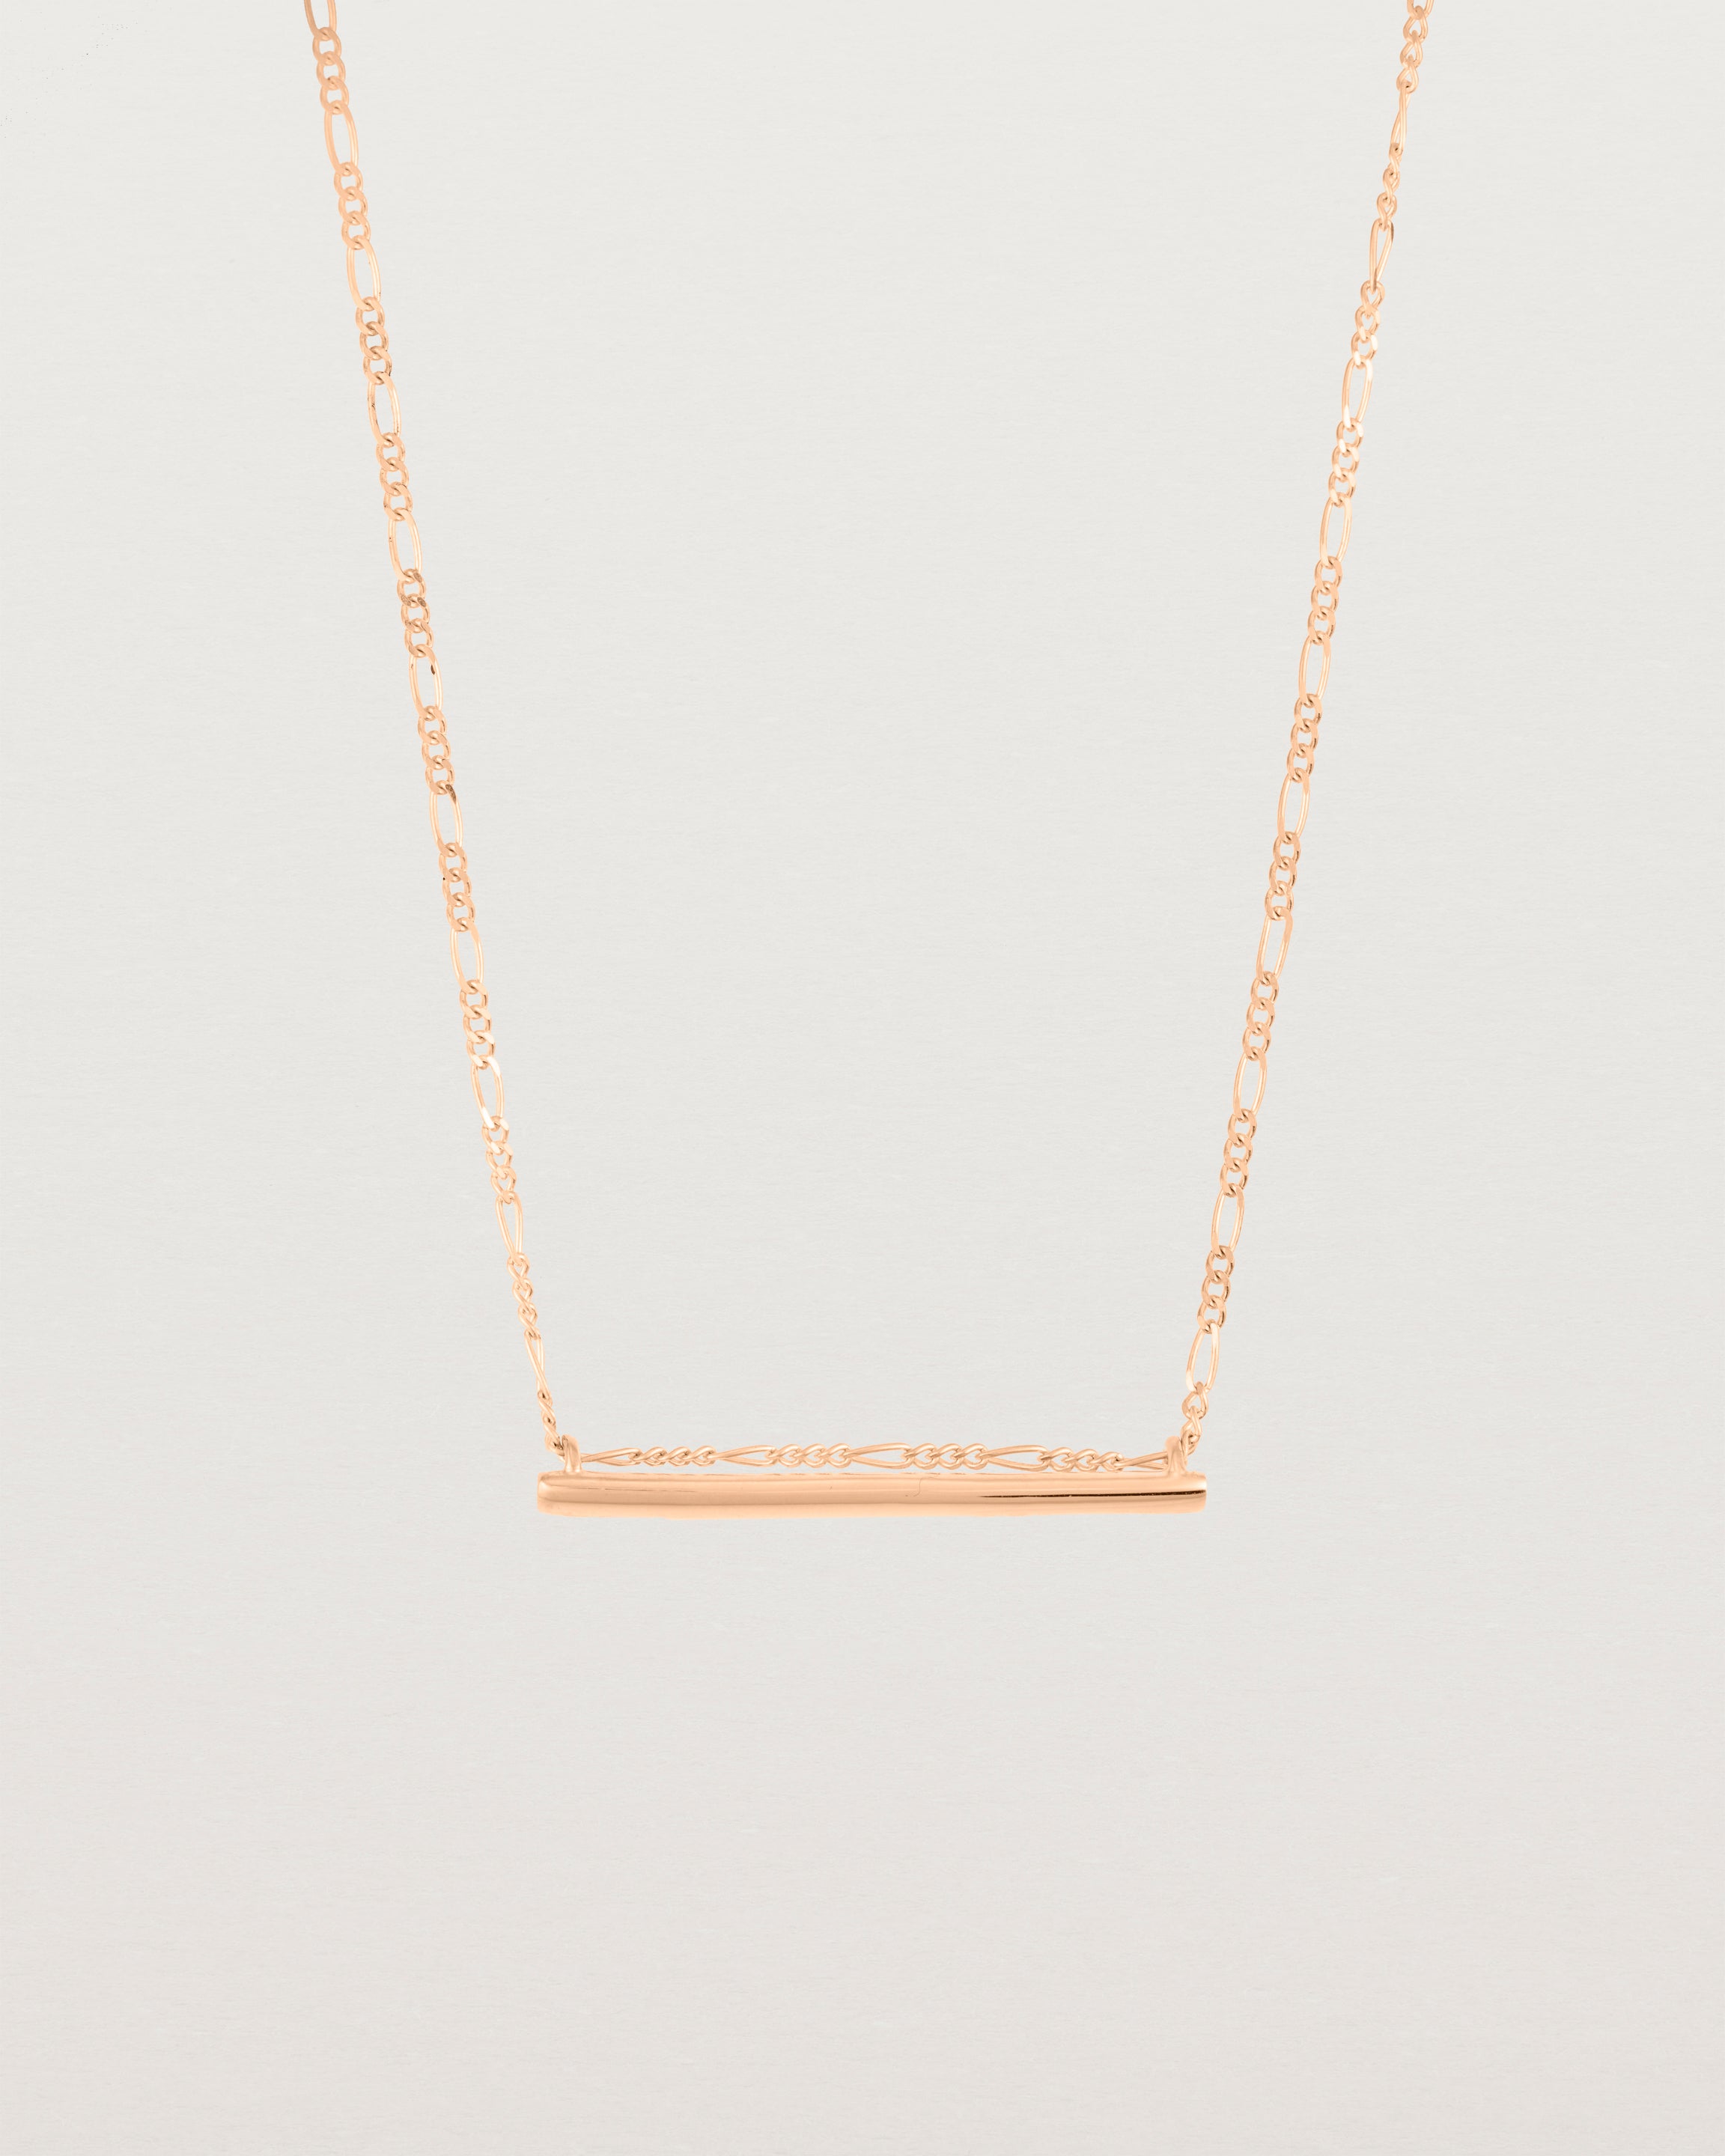 Ellipse necklace with a rose gold bar hanging from a chain in rose gold